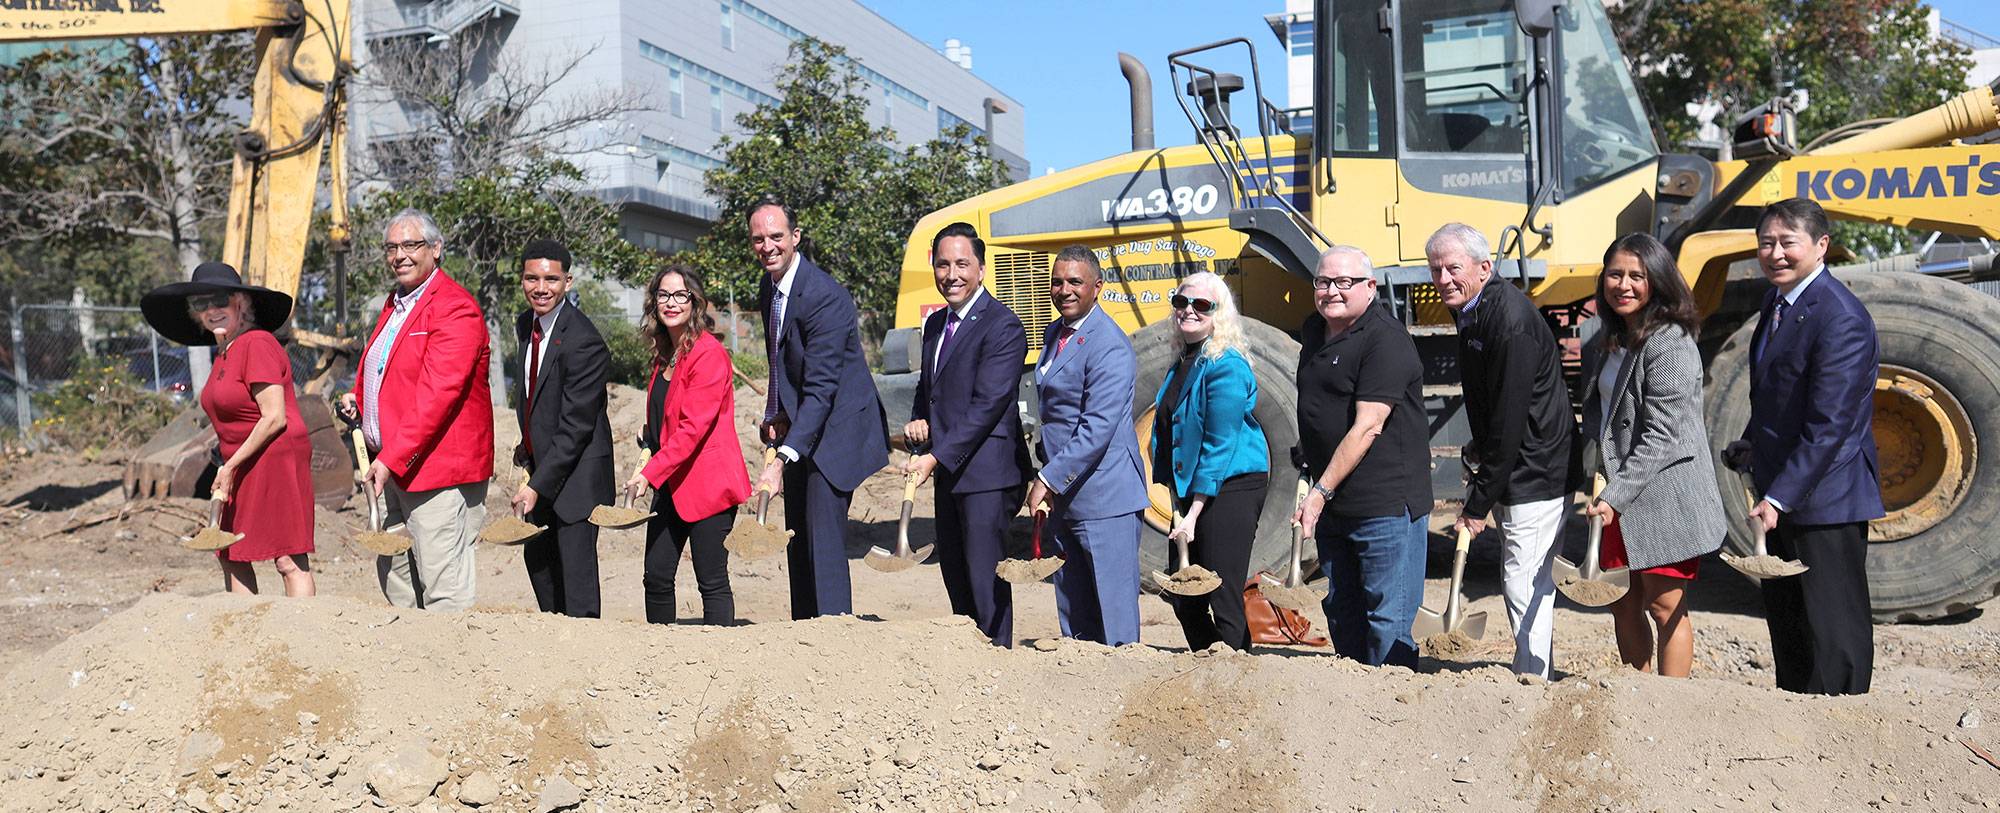 Twelve people hold shovels for a ceremonial groundbreaking photo